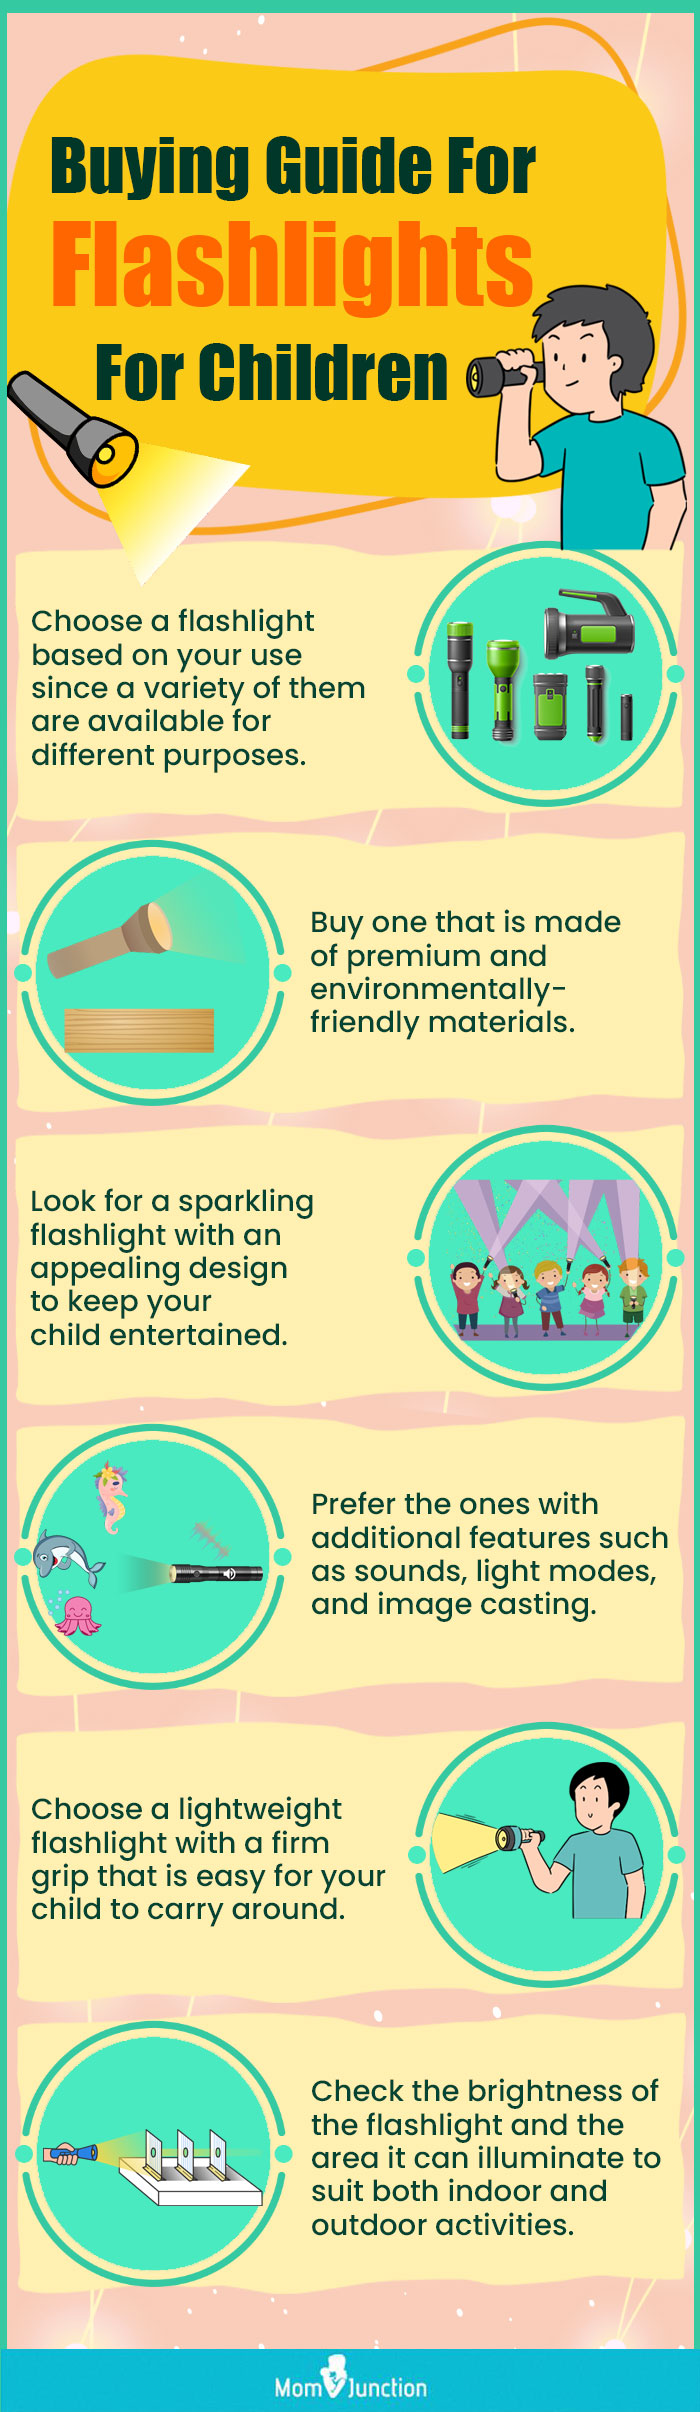 Buying-Guide-For-Flashlights-For-Children [infographic]